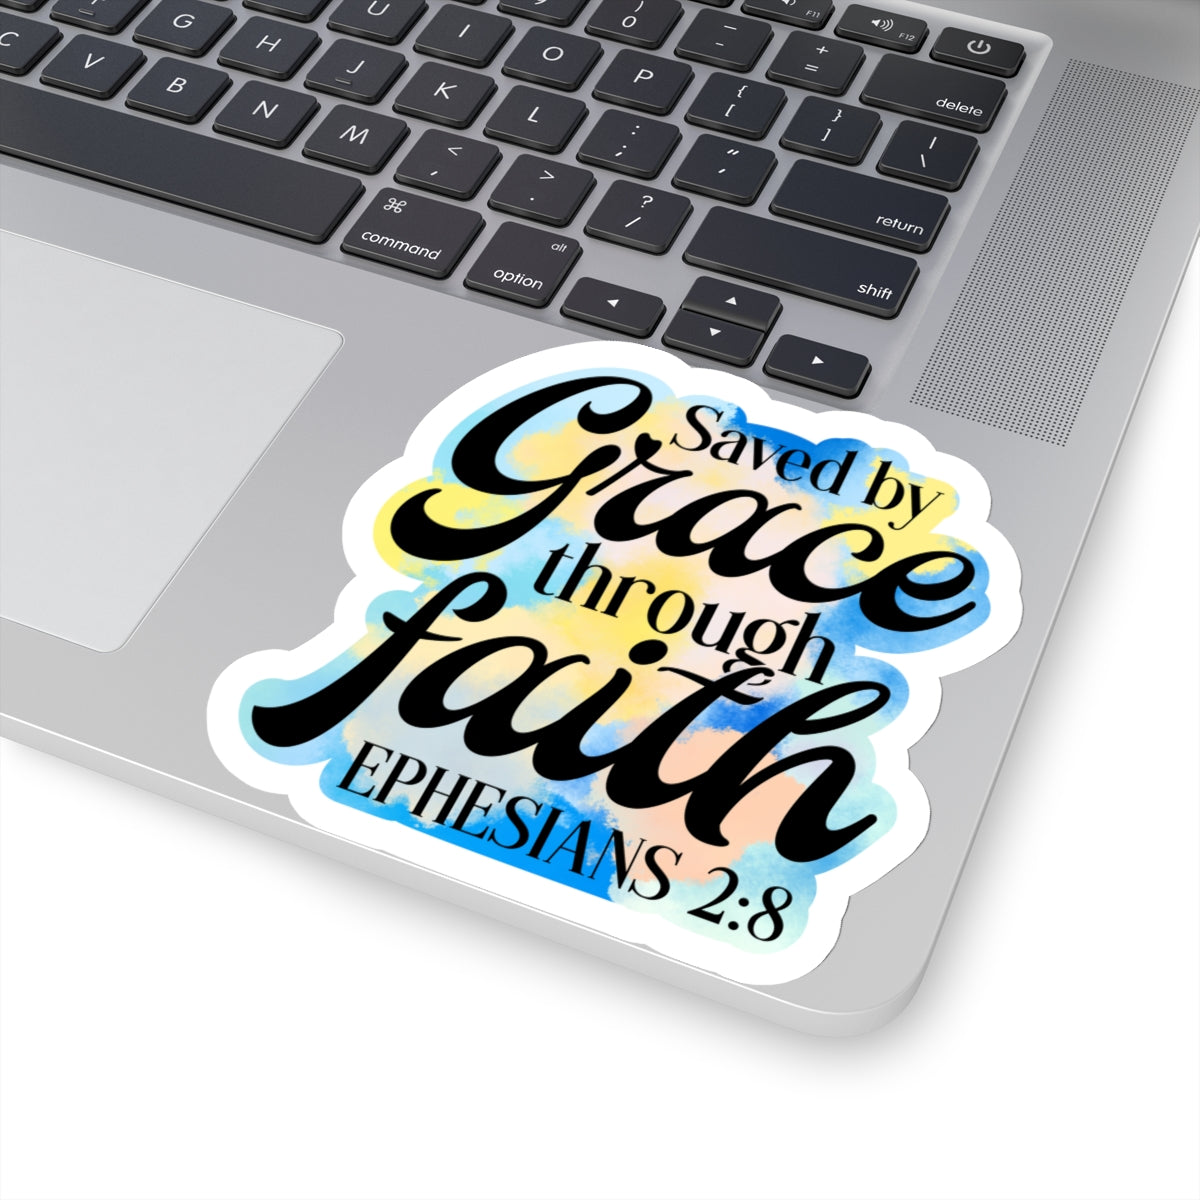 Saved By Grace Kiss-Cut Stickers